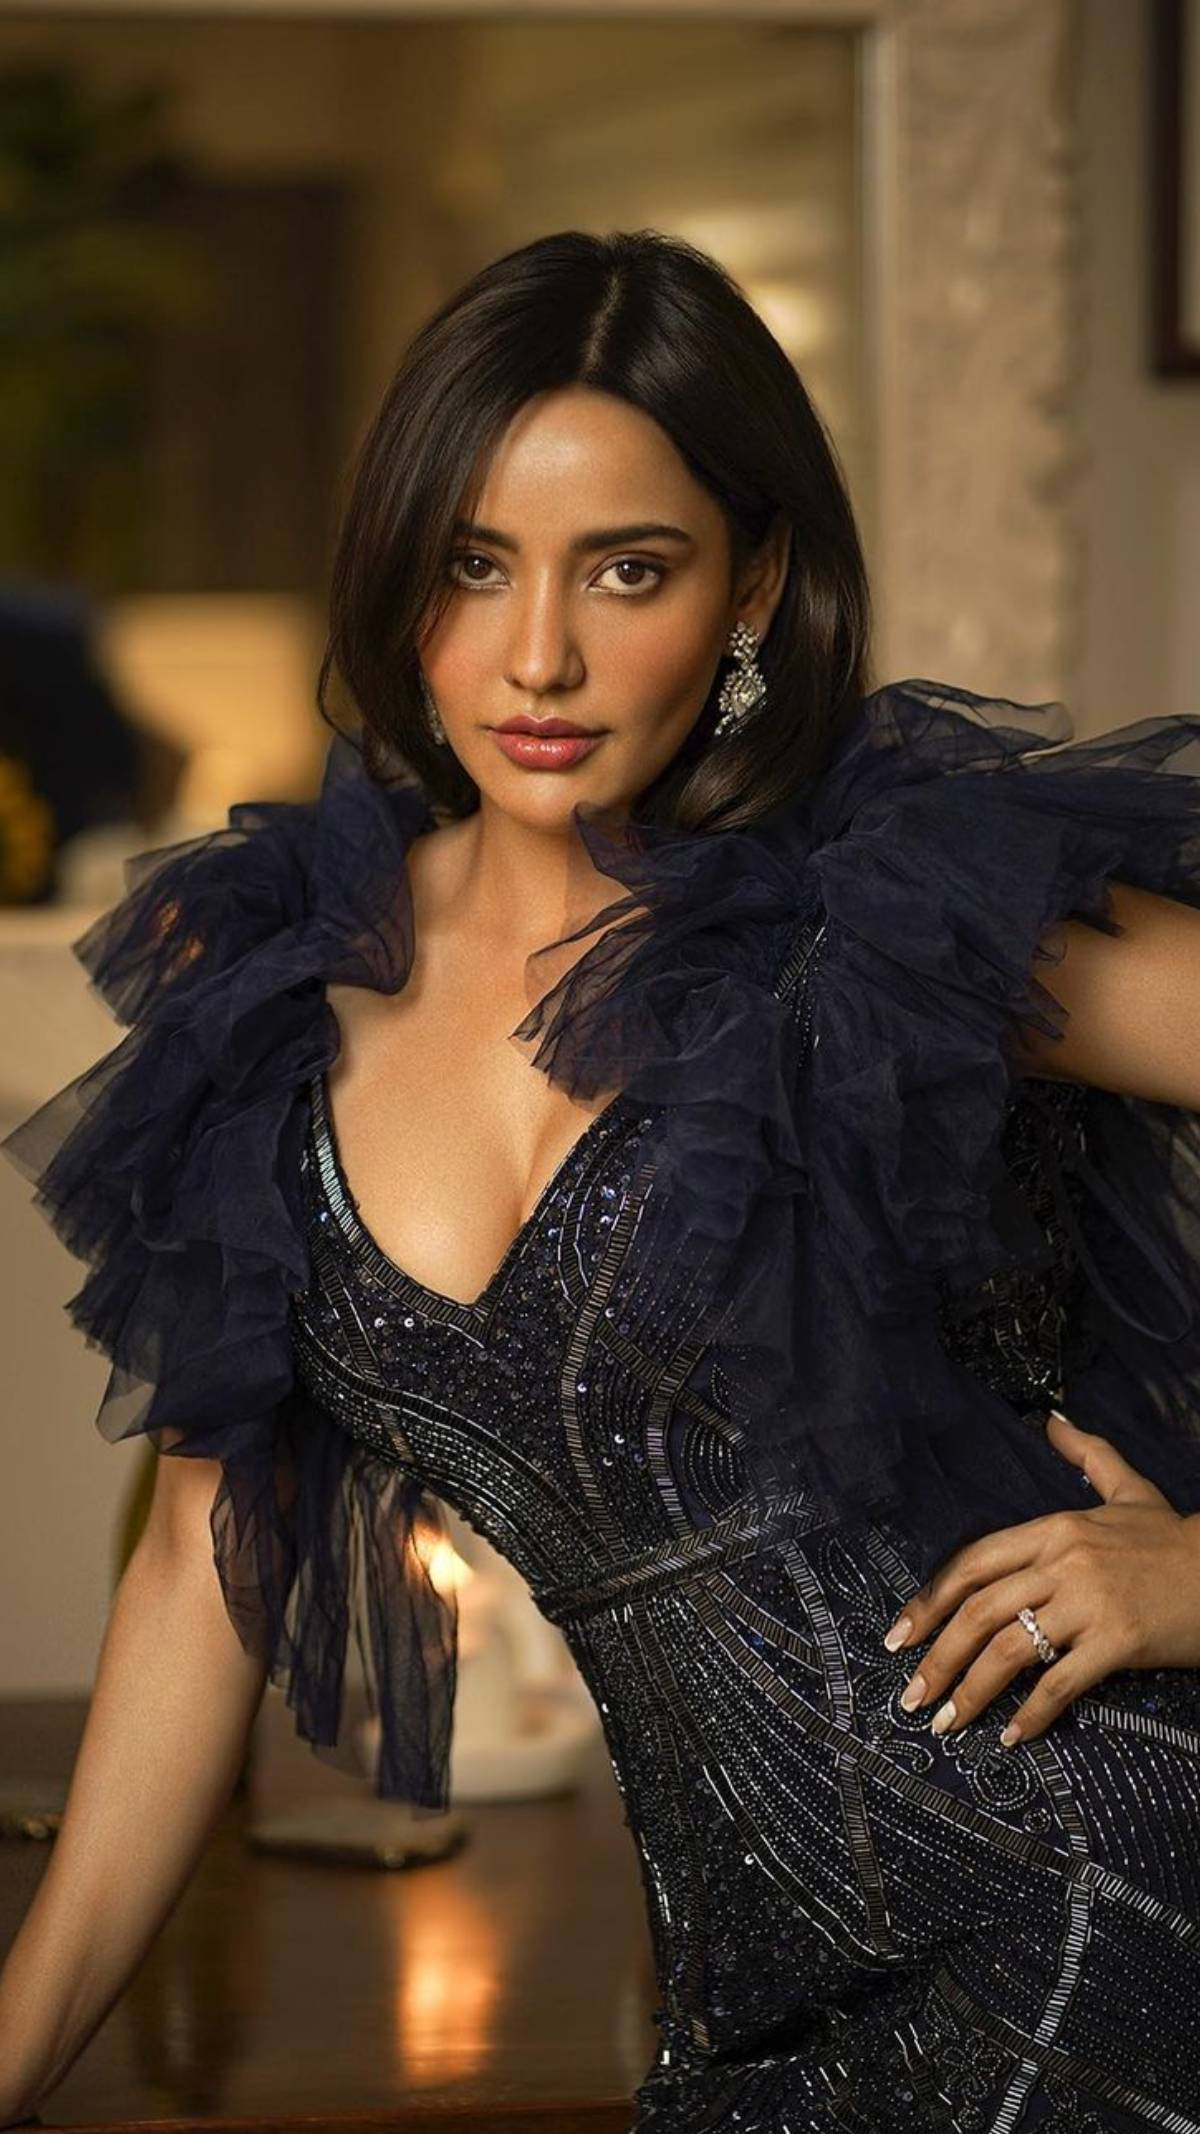 Neha Sharma flaunts her cleavage in the evening gown